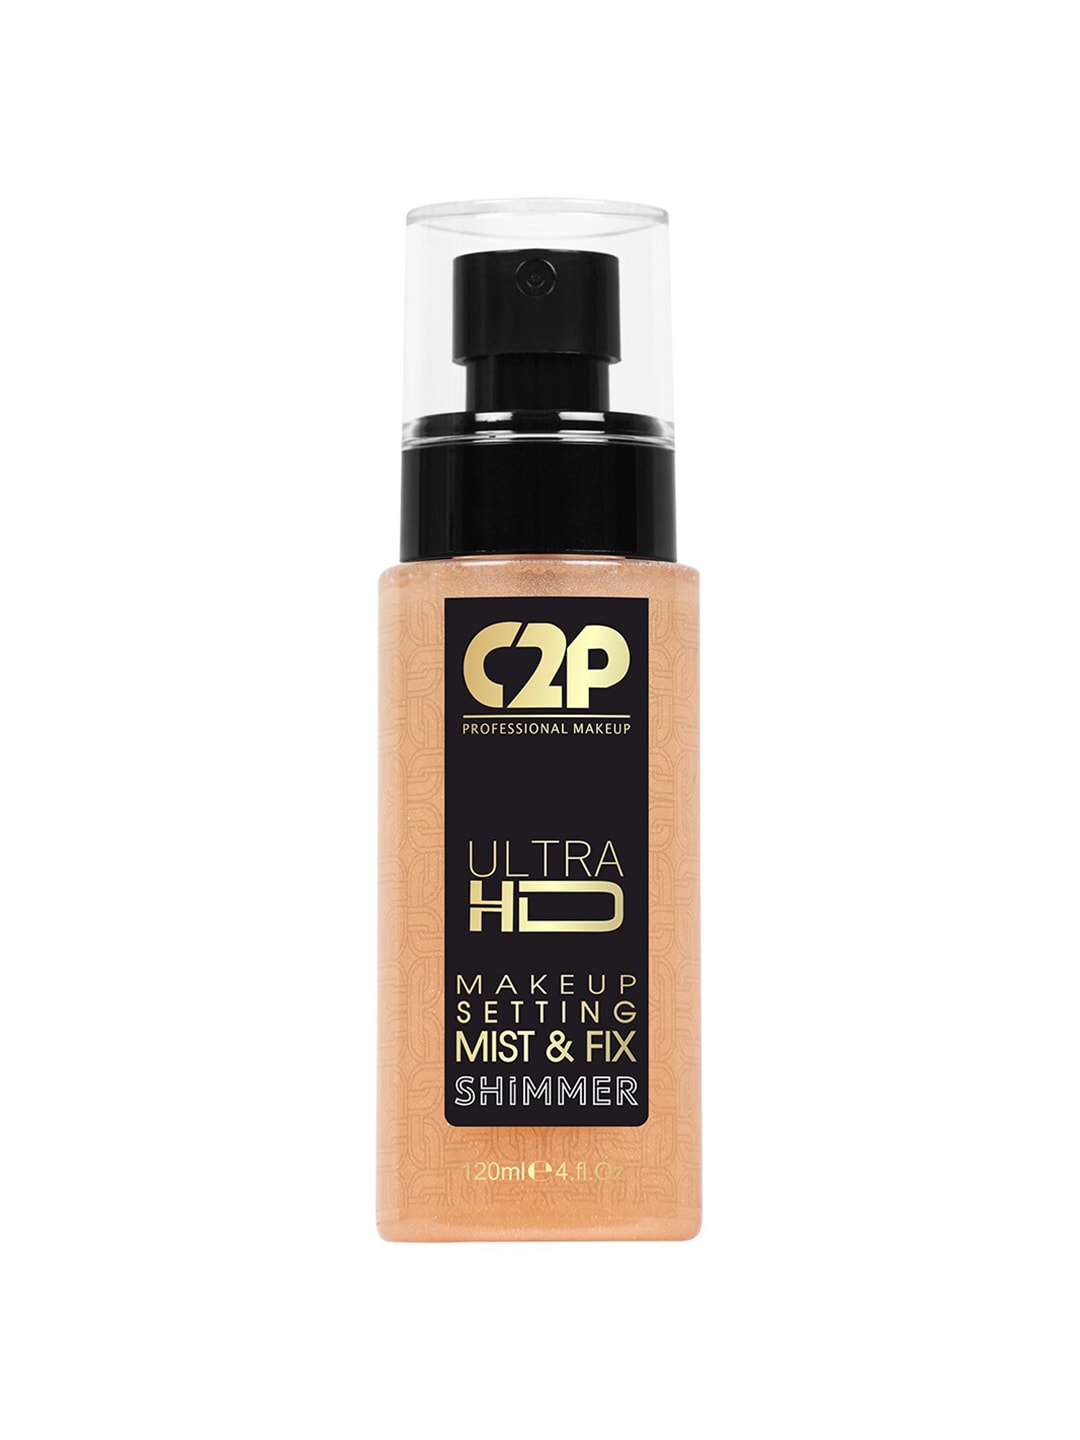 C2P PROFESSIONAL MAKEUP Ultra HD Makeup Setting Mist & Fix - Shimmer - Rose Gold Retro 03 Price in India